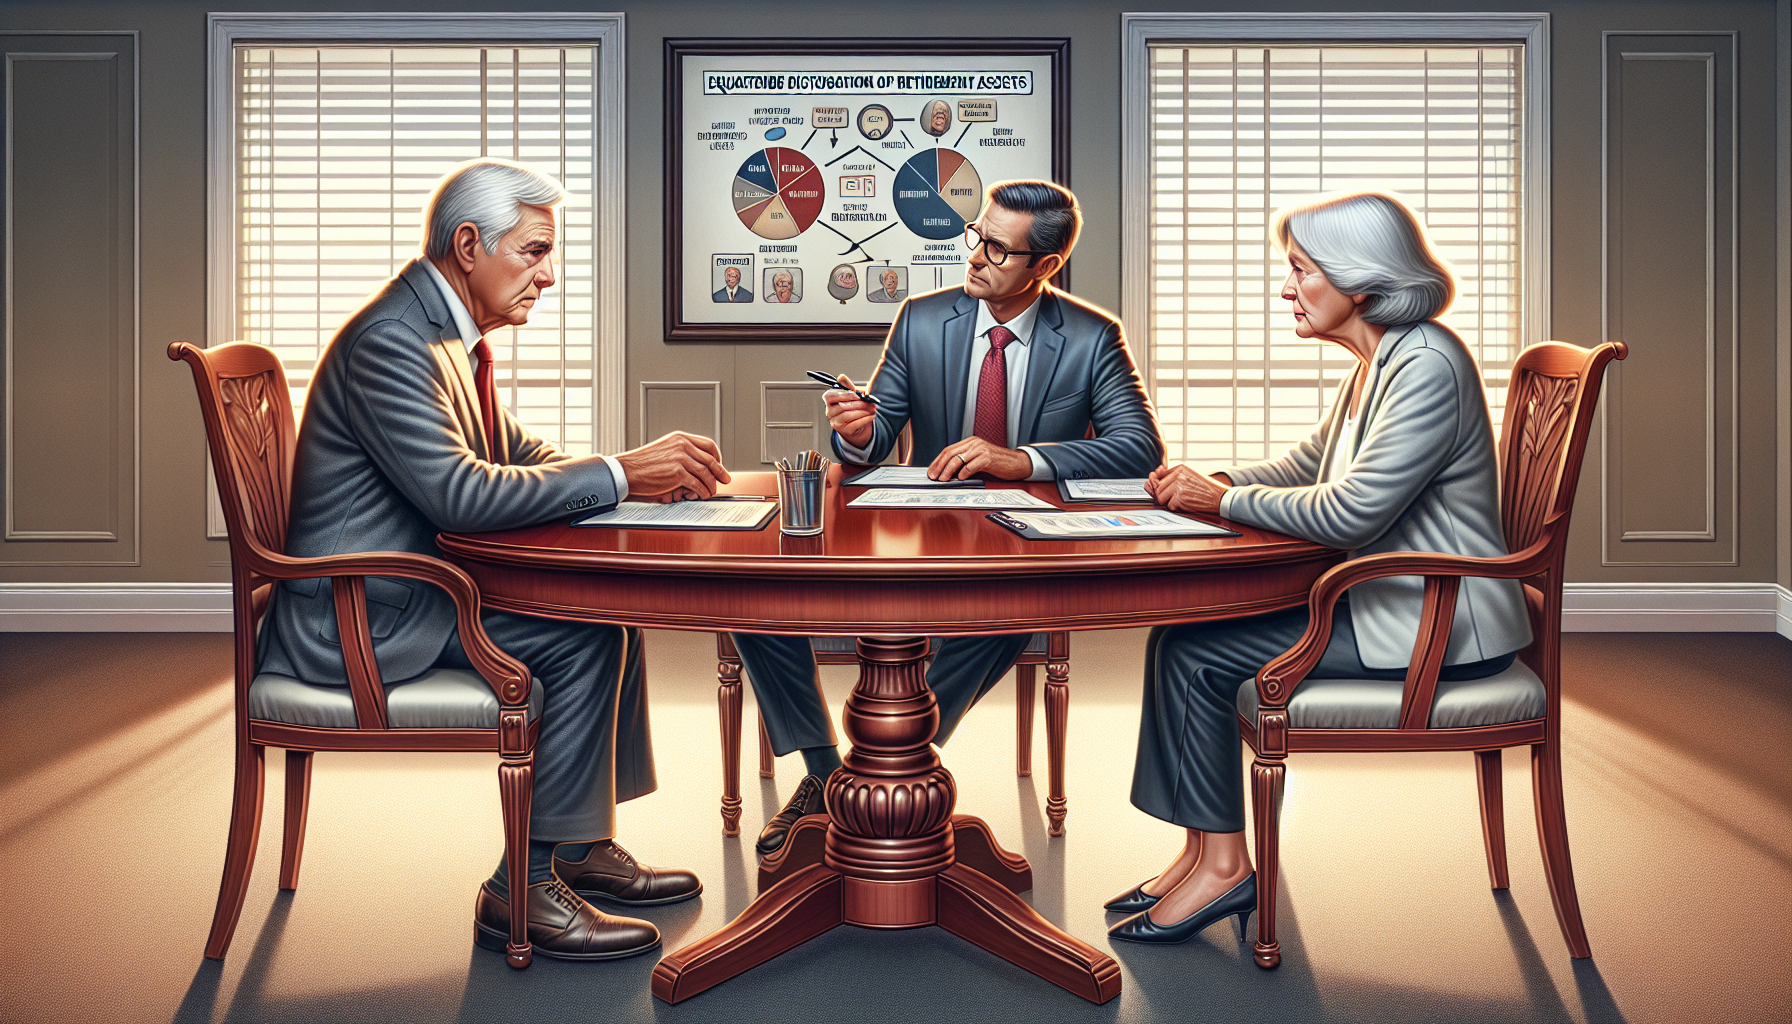 Illustration of a couple discussing the distribution of retirement assets with a mediator